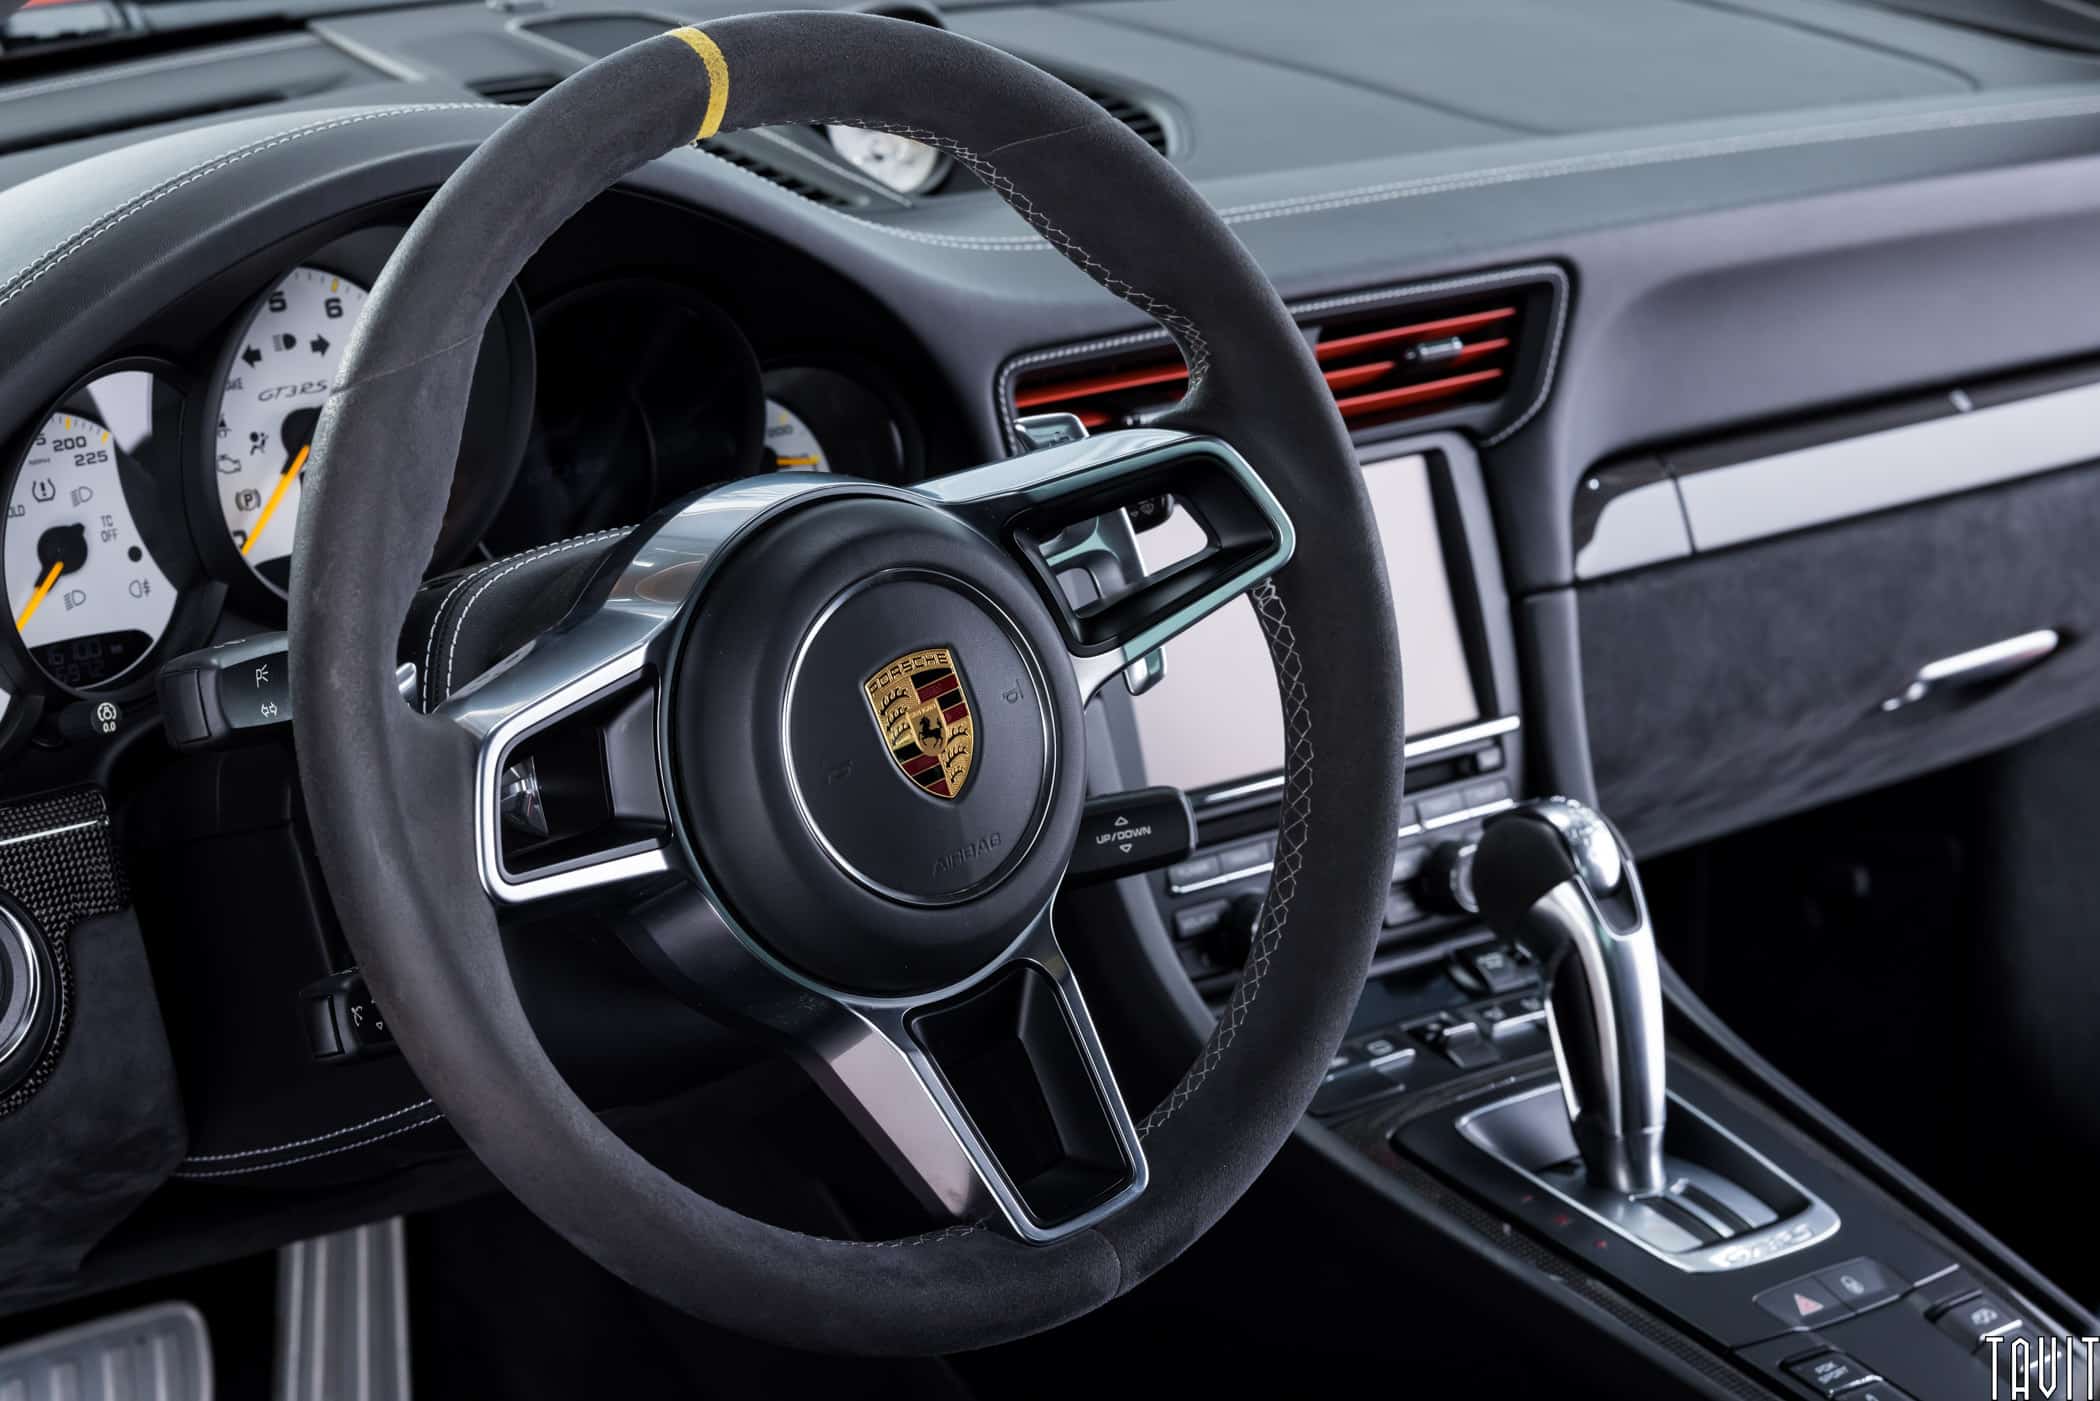 professional interior shot of porche steering wheel and gear shifter